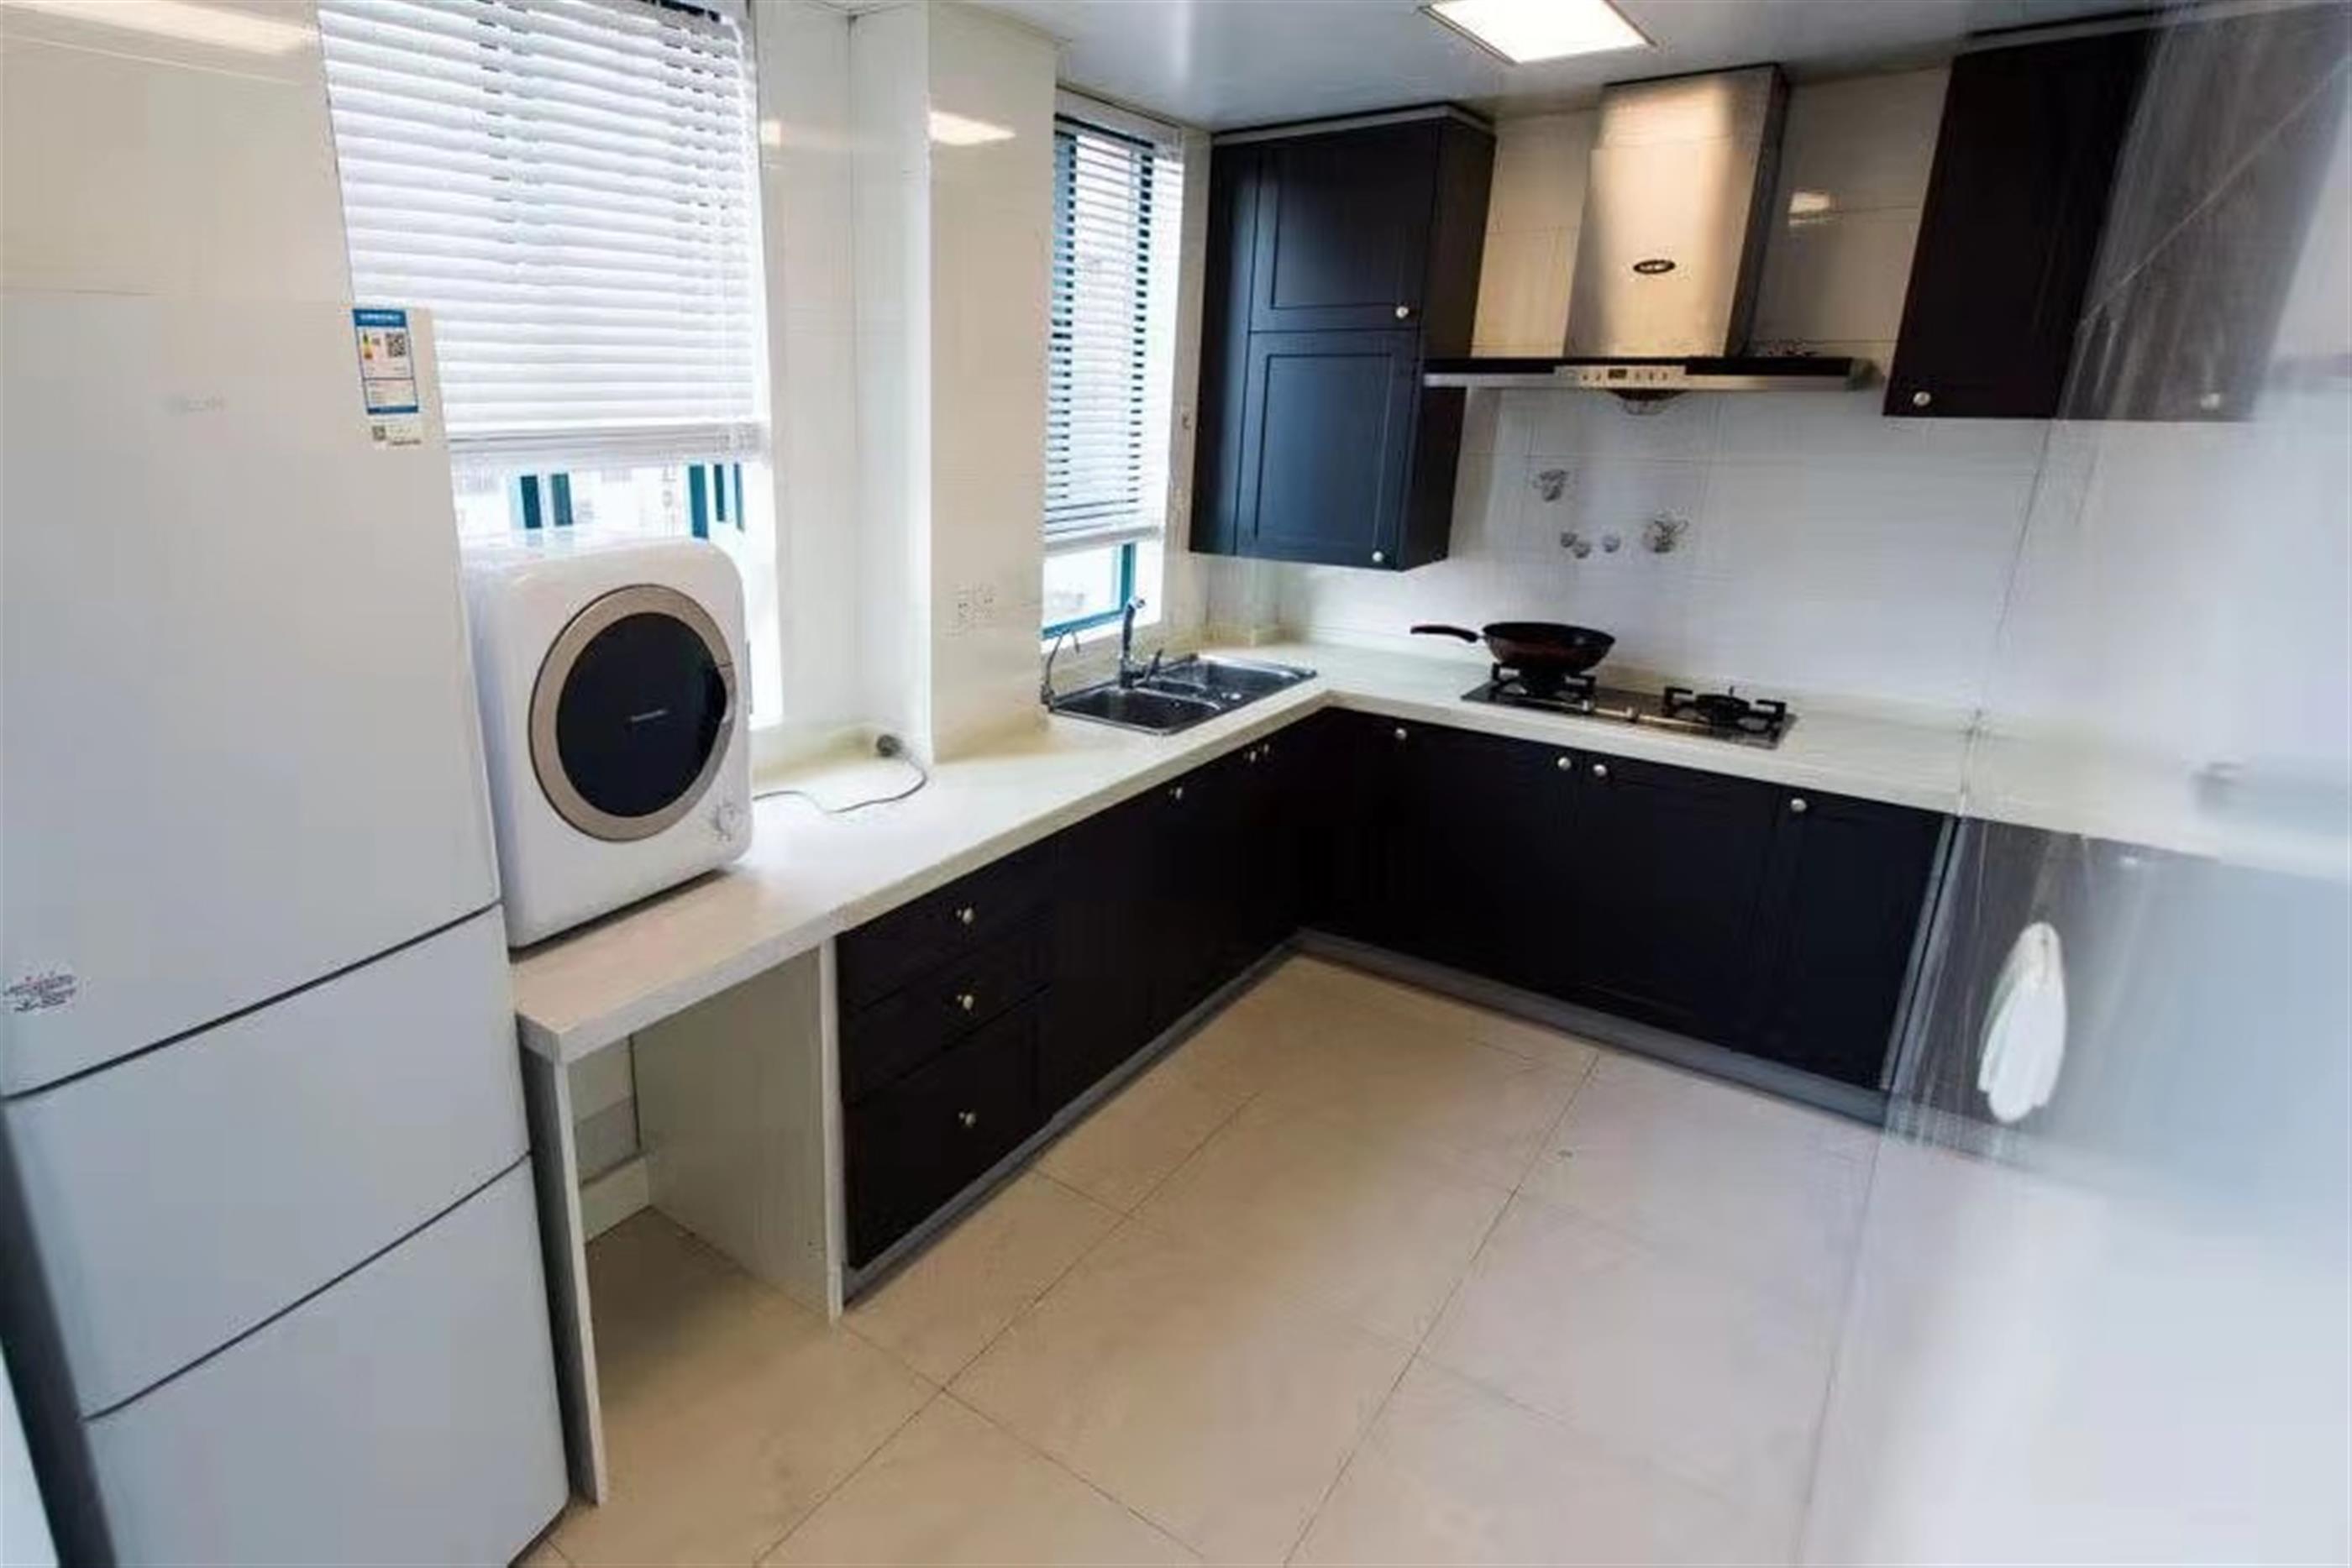 big kitchen Large 2BR Apartment nr LN 2/3/4 in Shanghai’s Xinhua Road Area for Rent